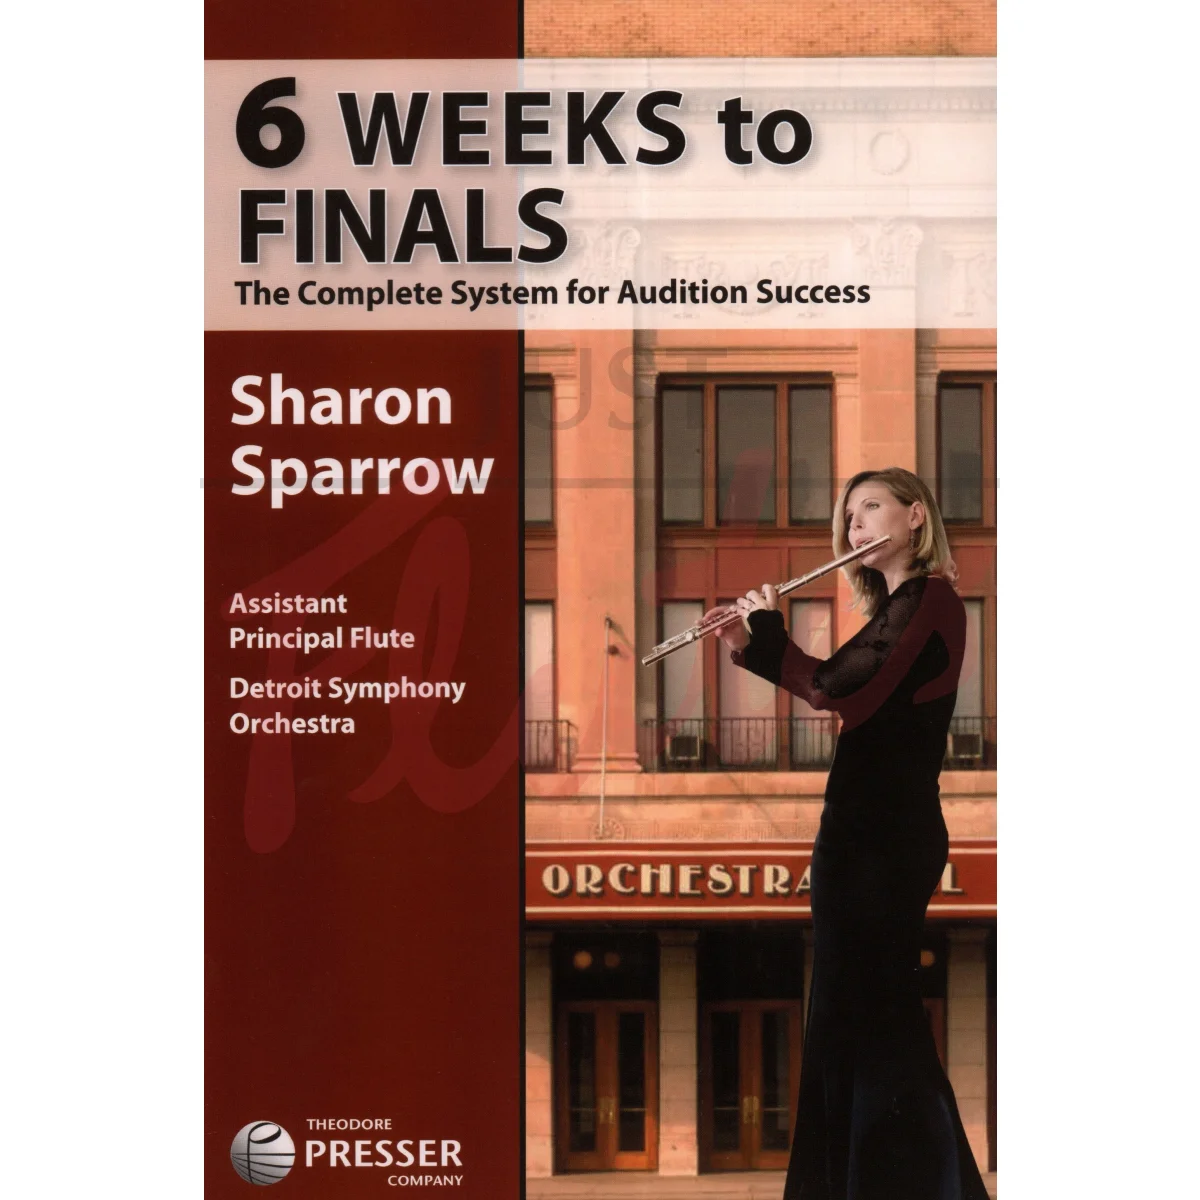 6 Weeks to Finals - A Complete System for Audition Success